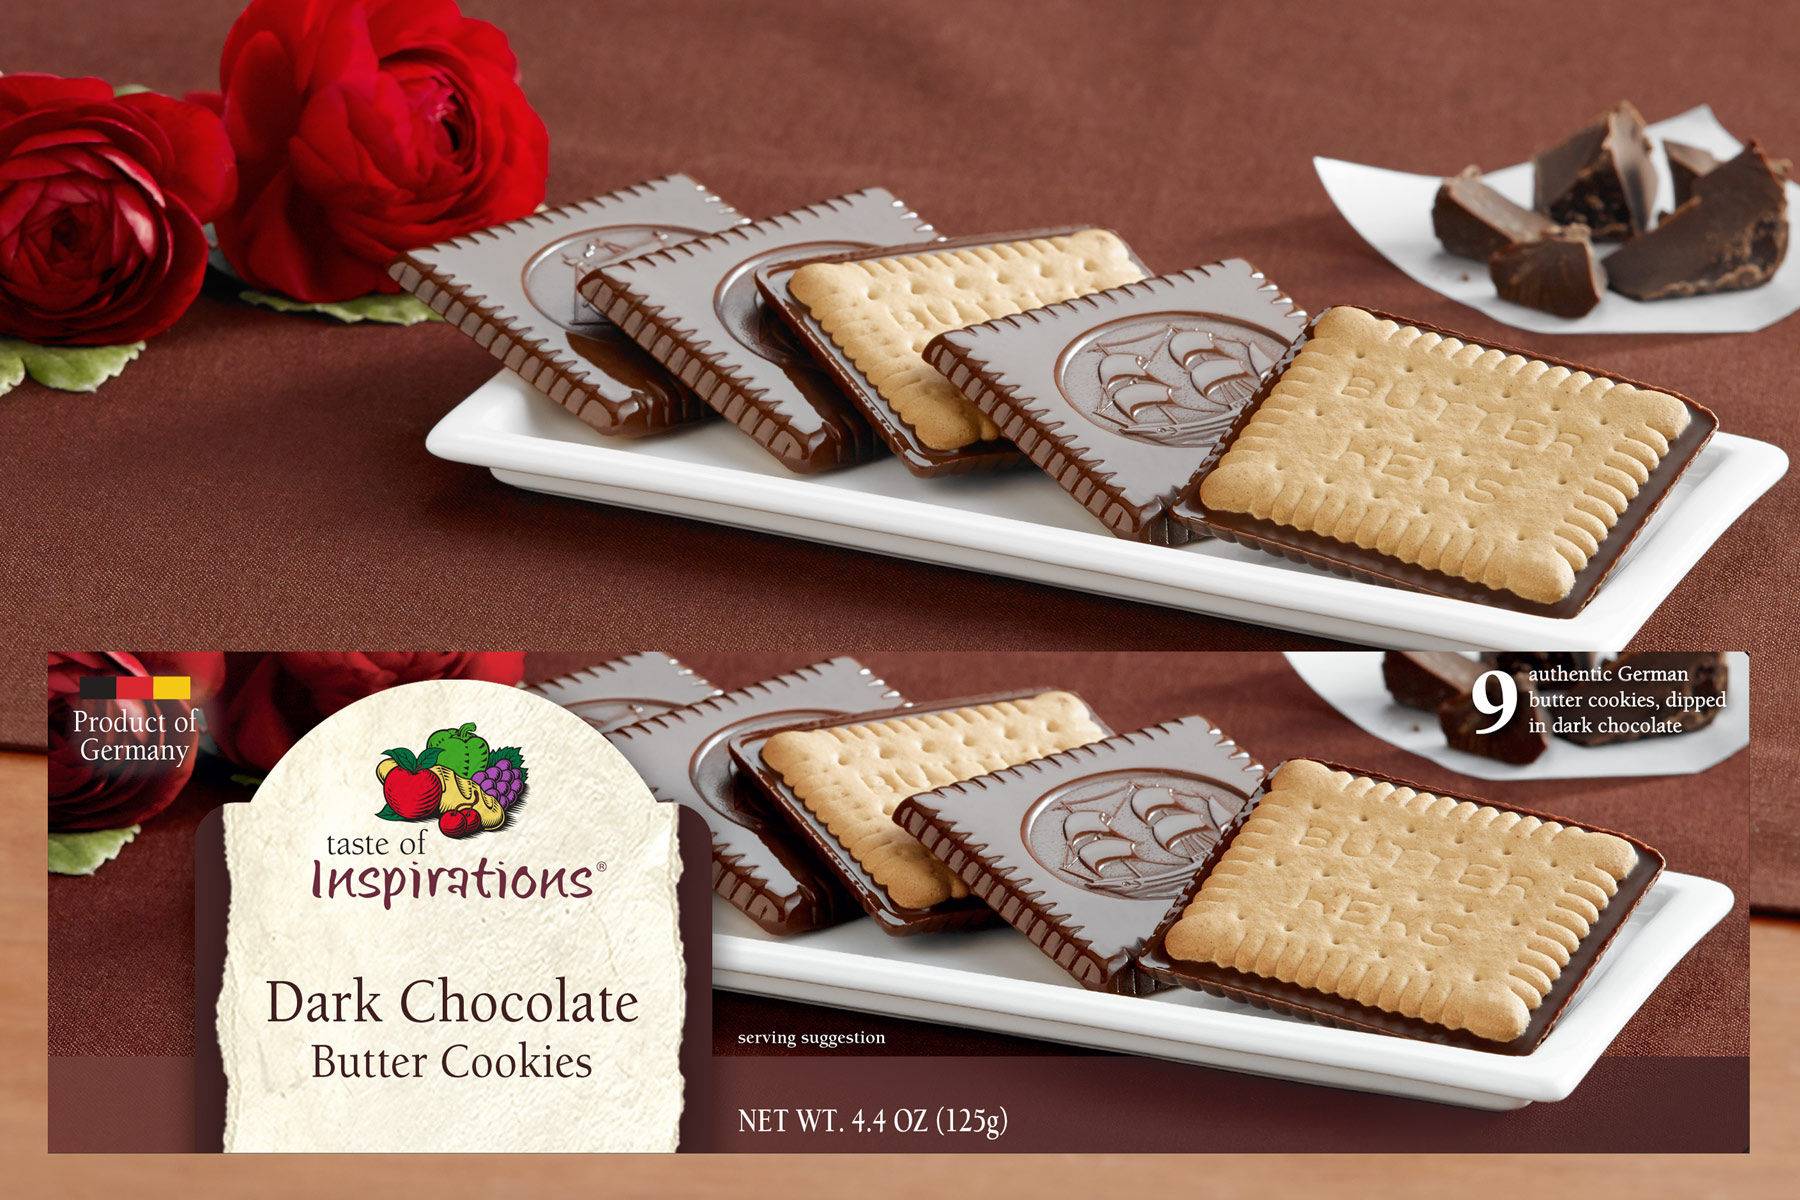 Taste of Inspirations Cookies for DelHaize America